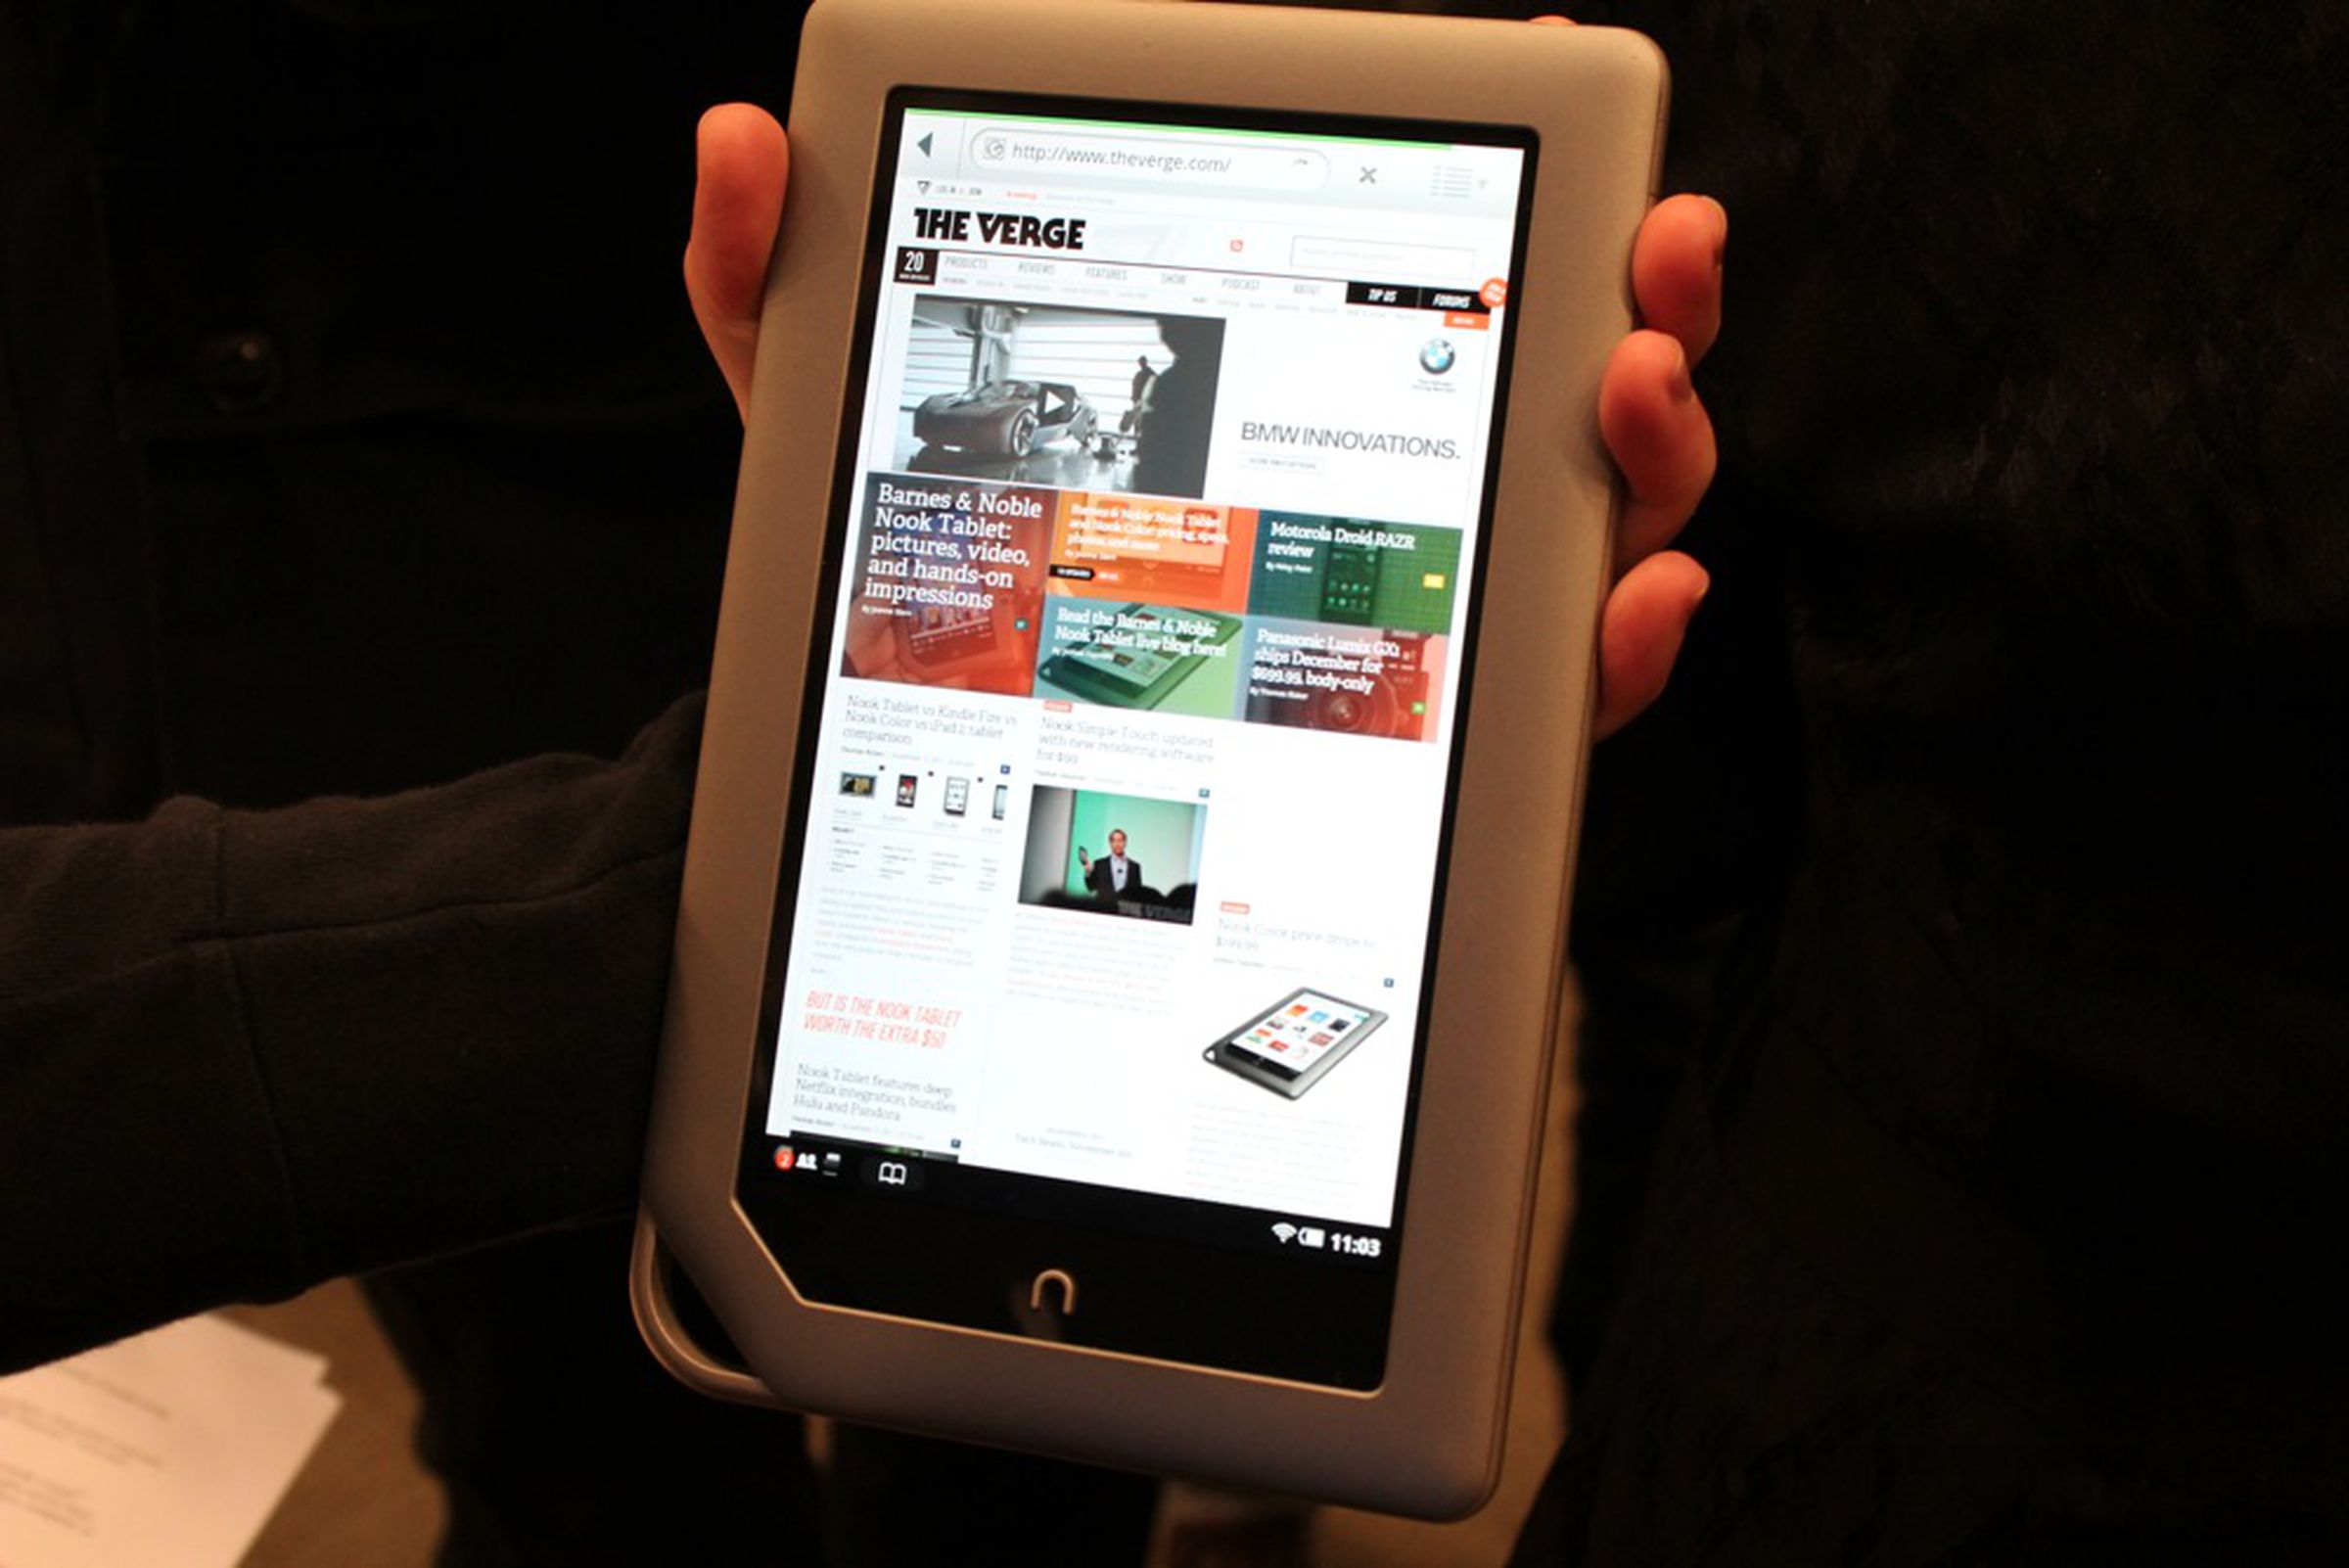 Barnes & Noble Nook Tablet hands-on pictures 